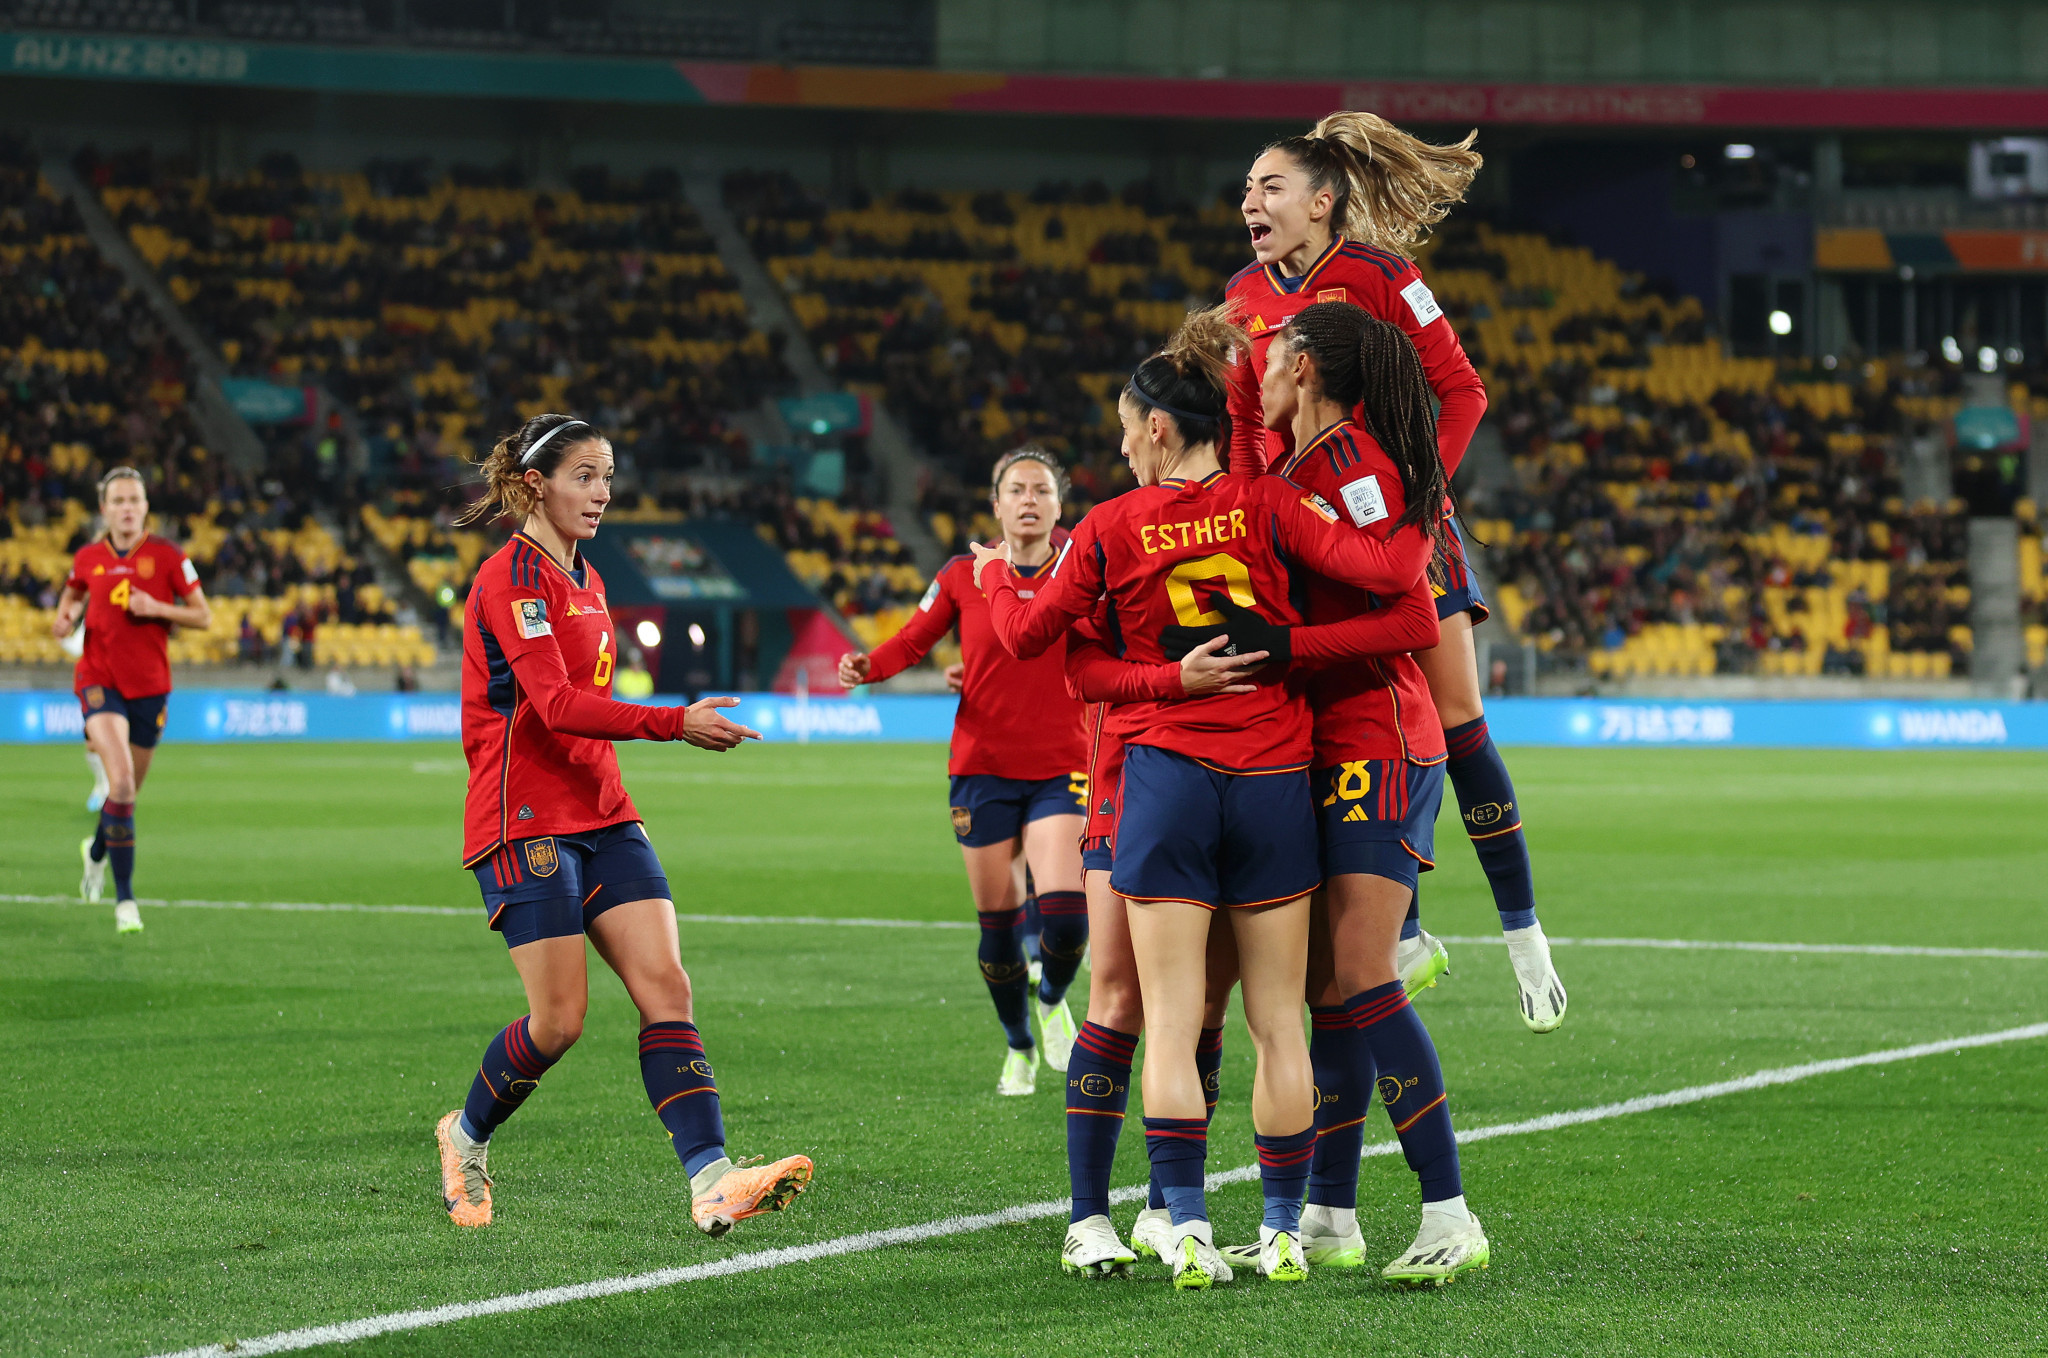 Dominant Spain impress in FIFA Women's World Cup opener against Costa Rica